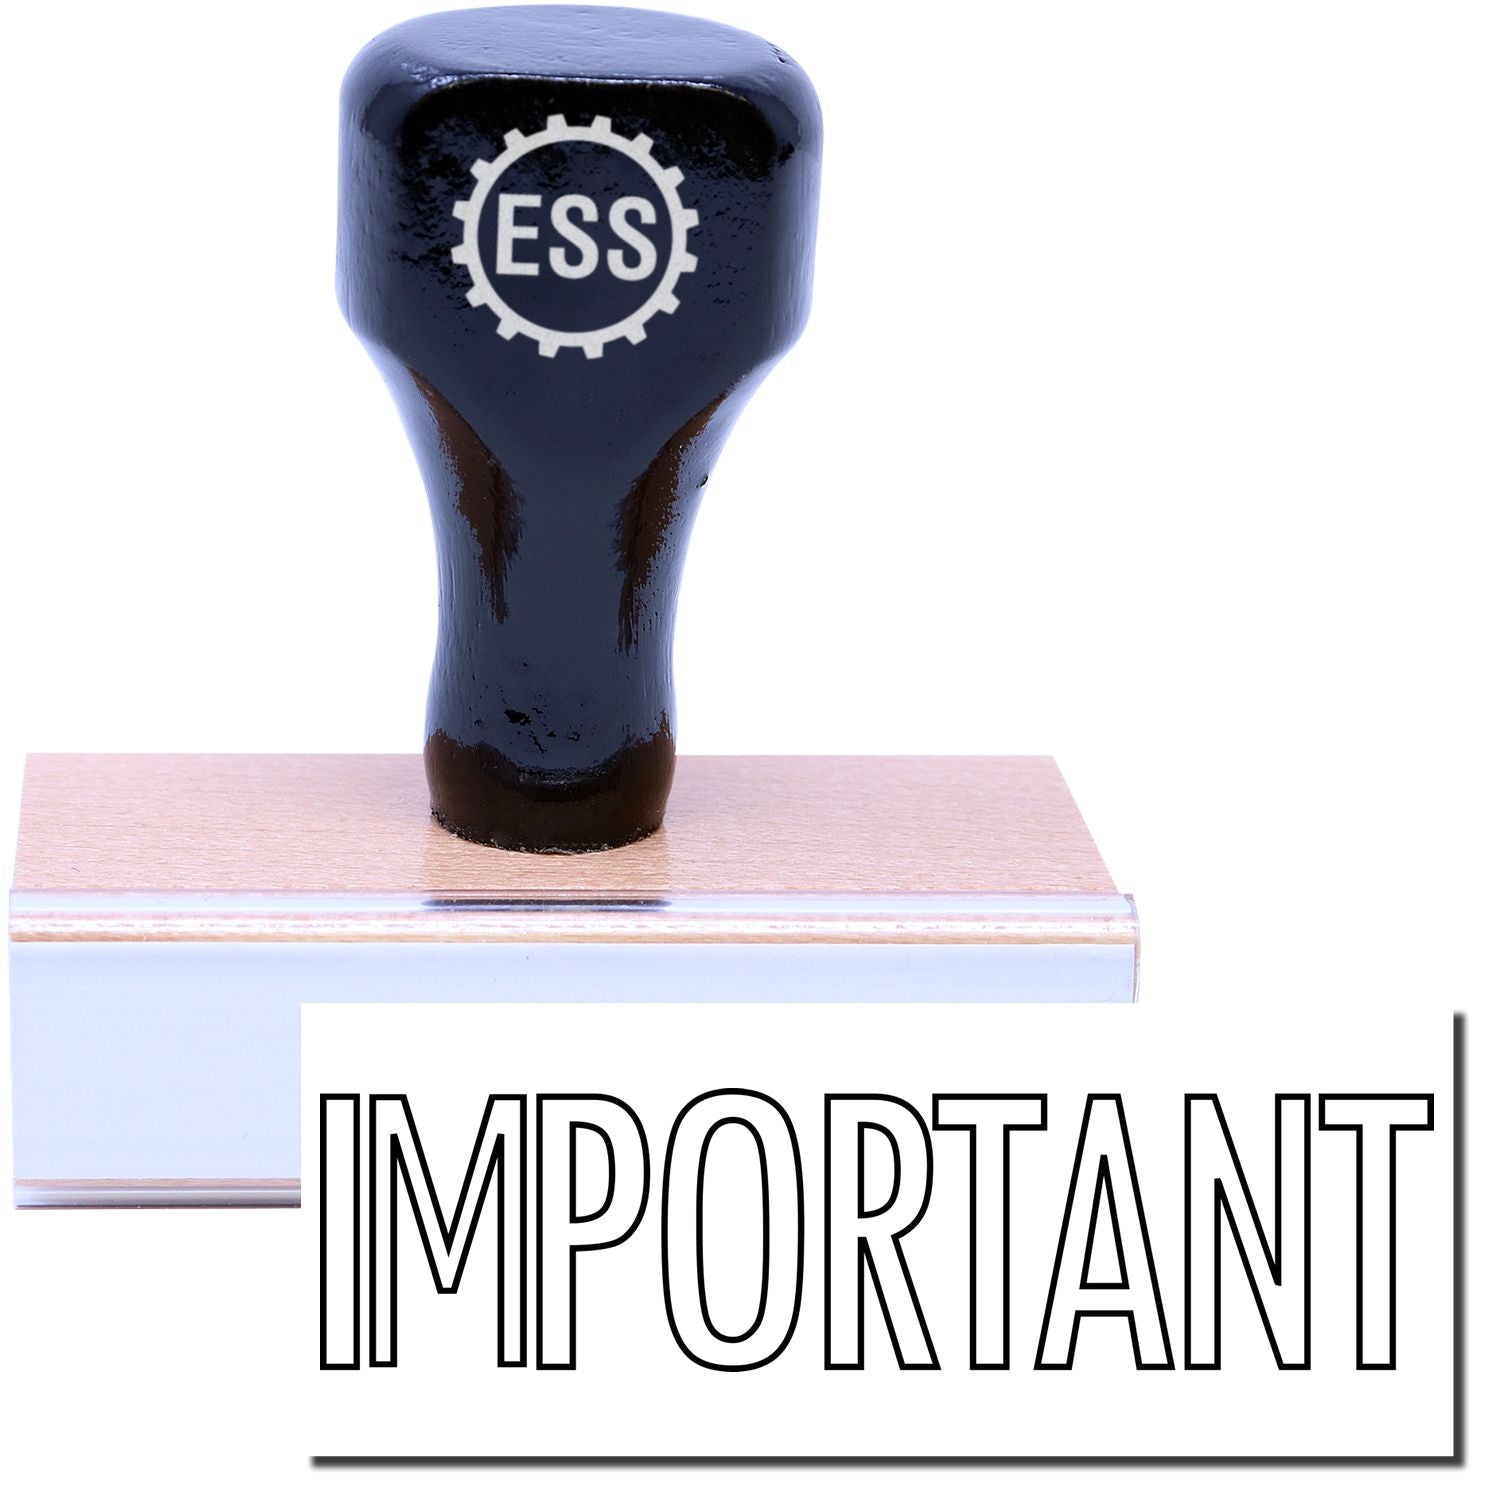 A stock office rubber stamp with a stamped image showing how the text "IMPORTANT" in a large outline font is displayed after stamping.